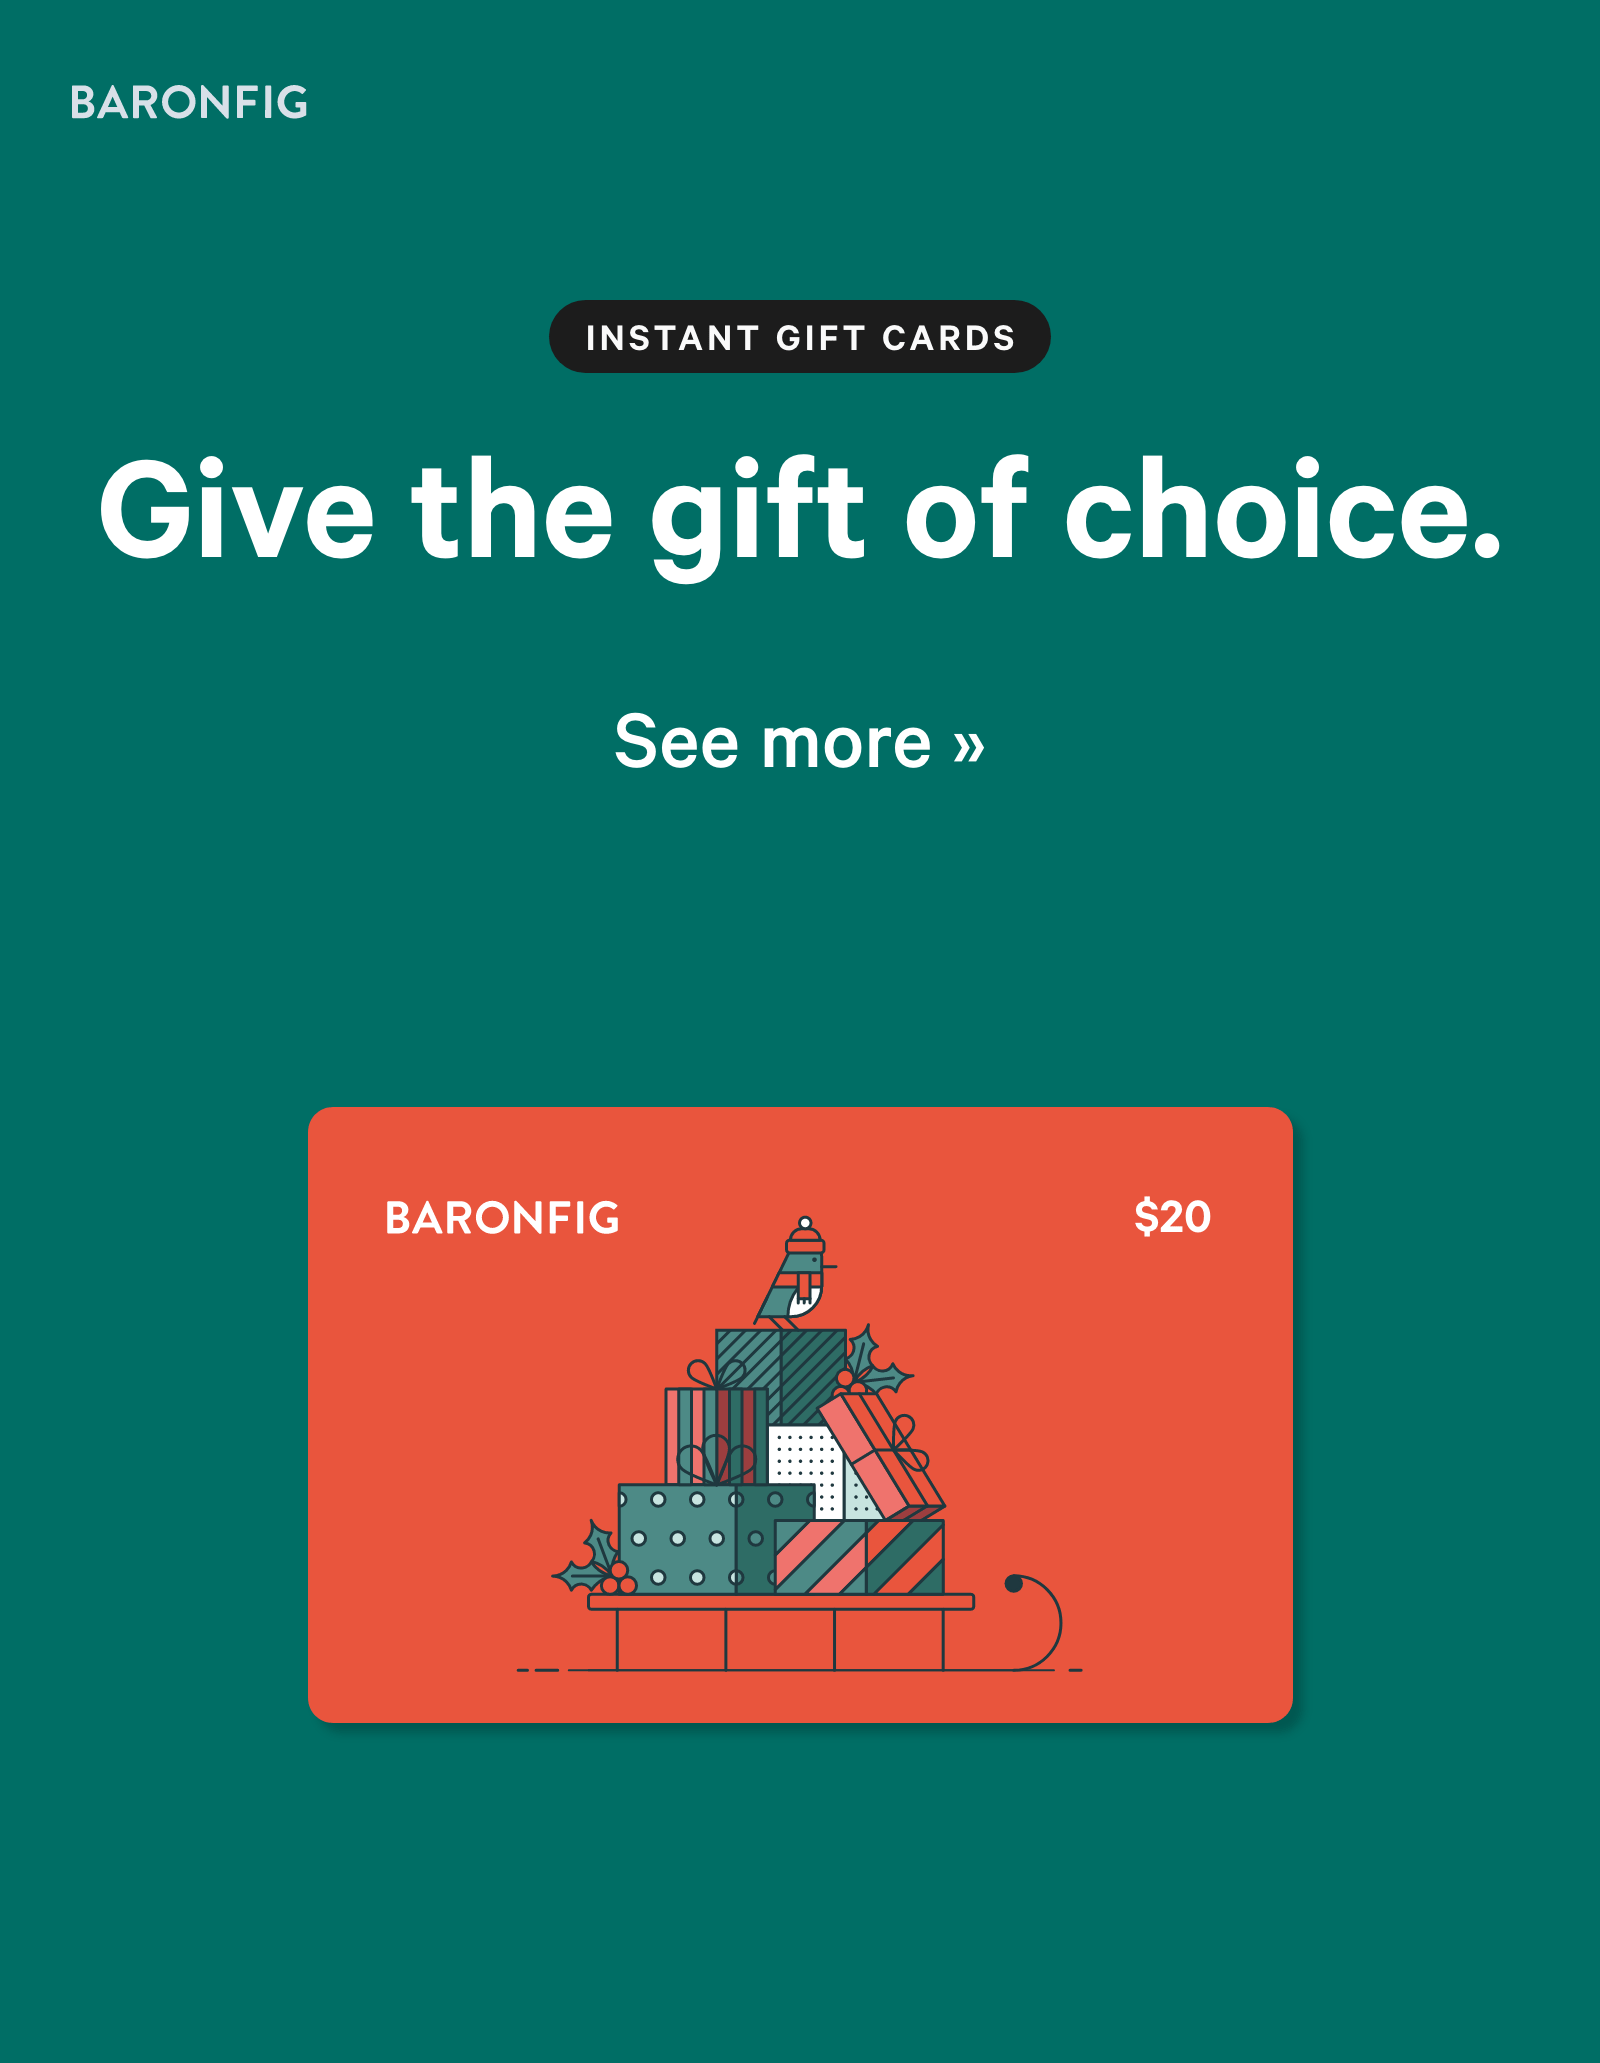 Give the gift of choice. See more ?